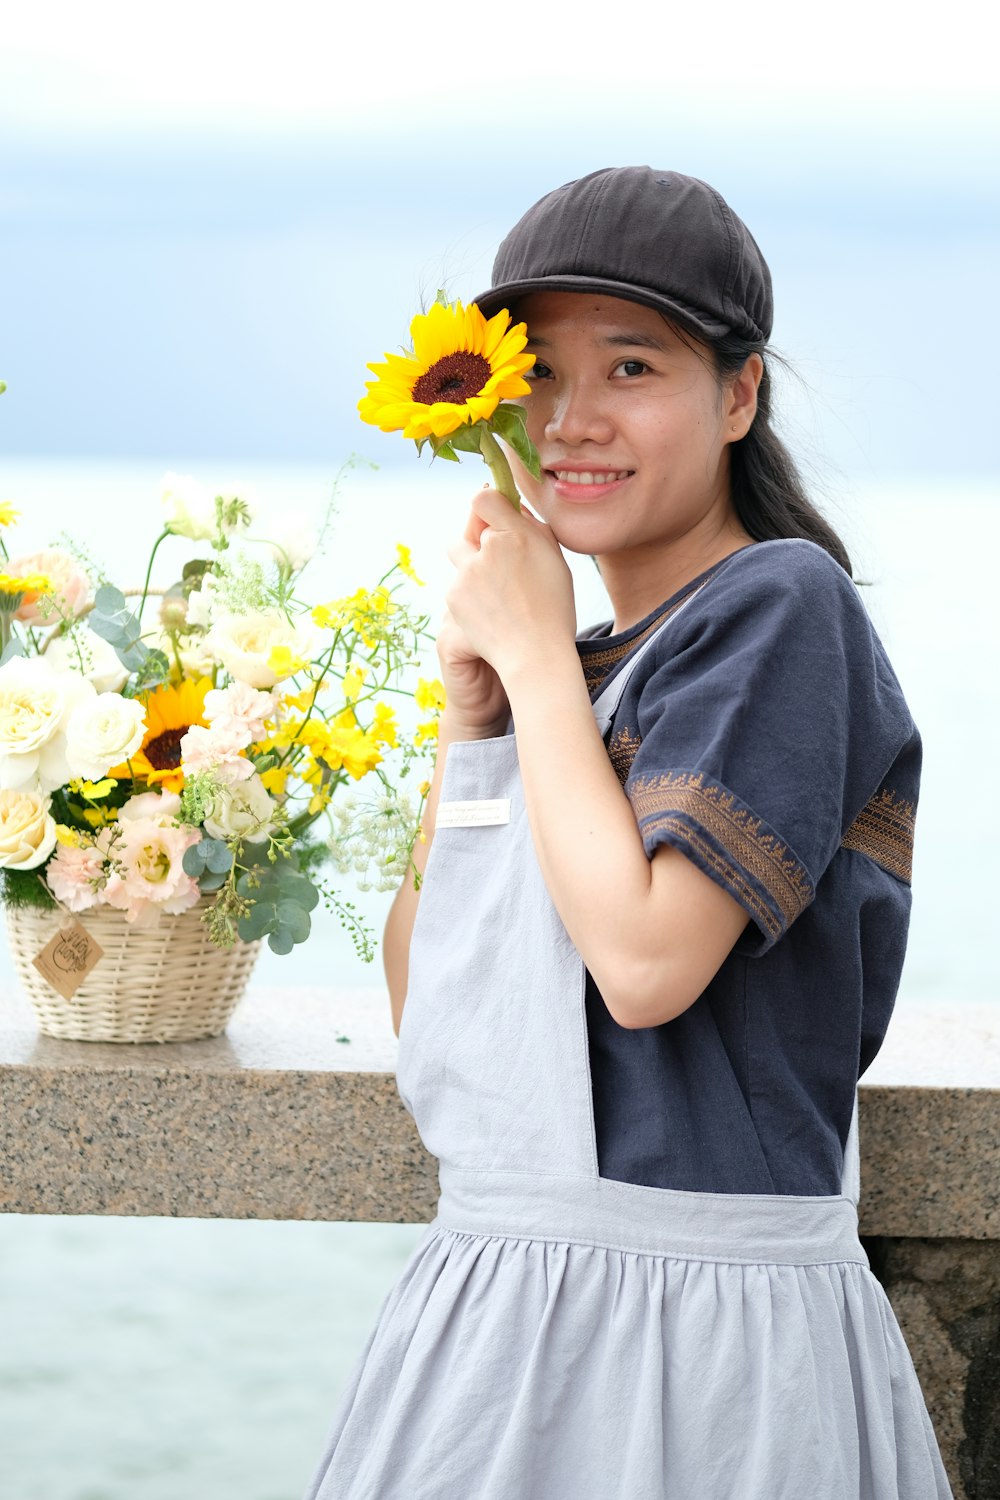 a woman holding a yellow flower